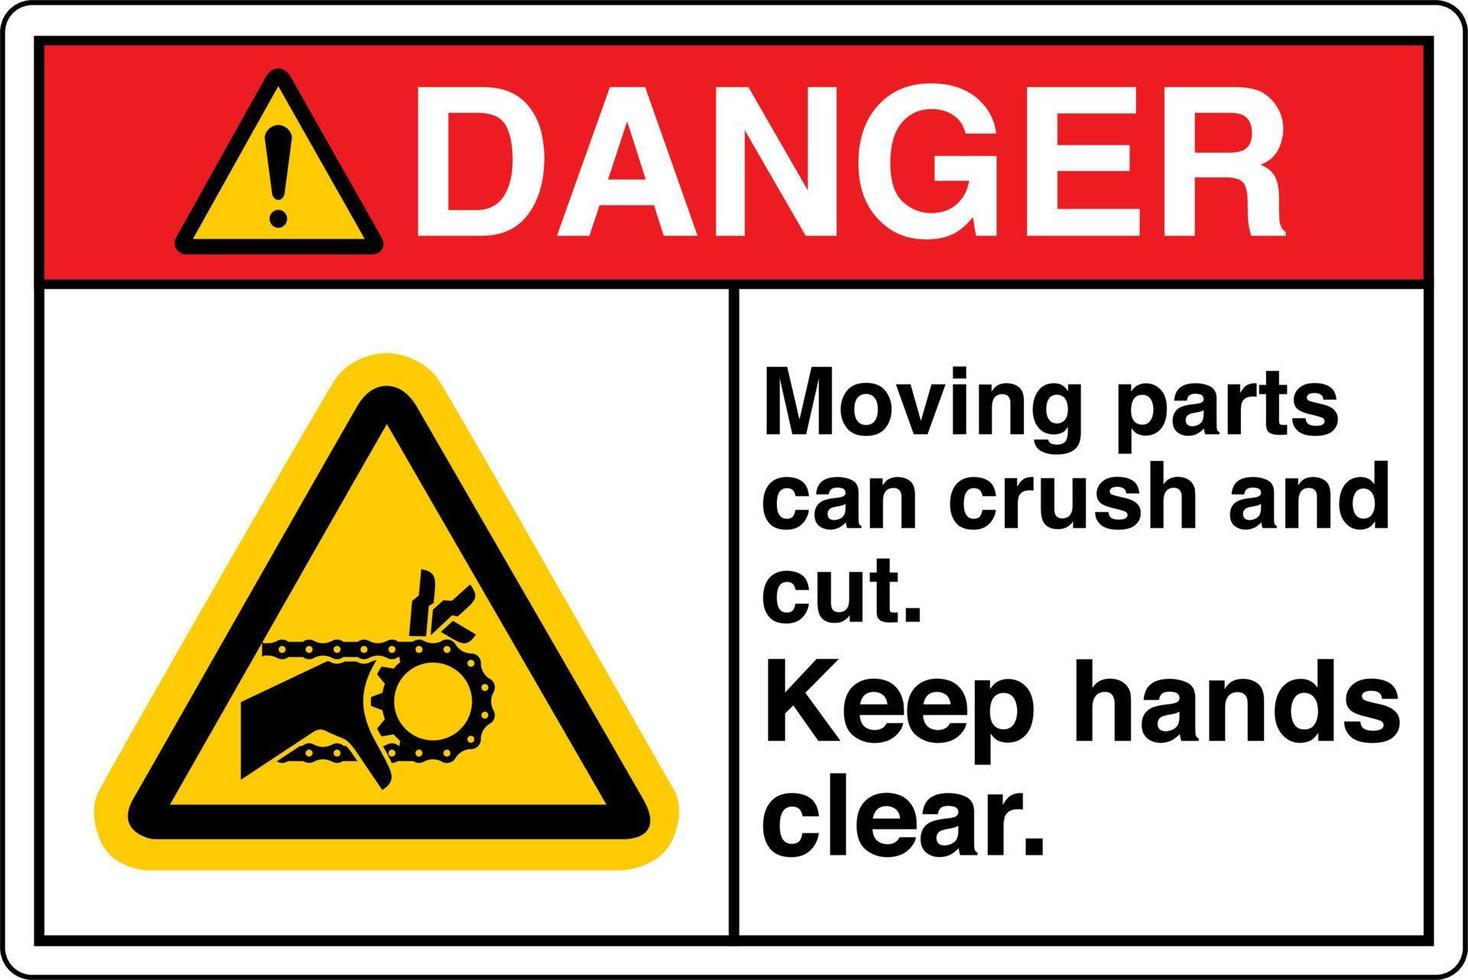 Safety Sign Marking Label Symbol Pictogram Danger Moving parts can crush and cut Keep hands clear vector